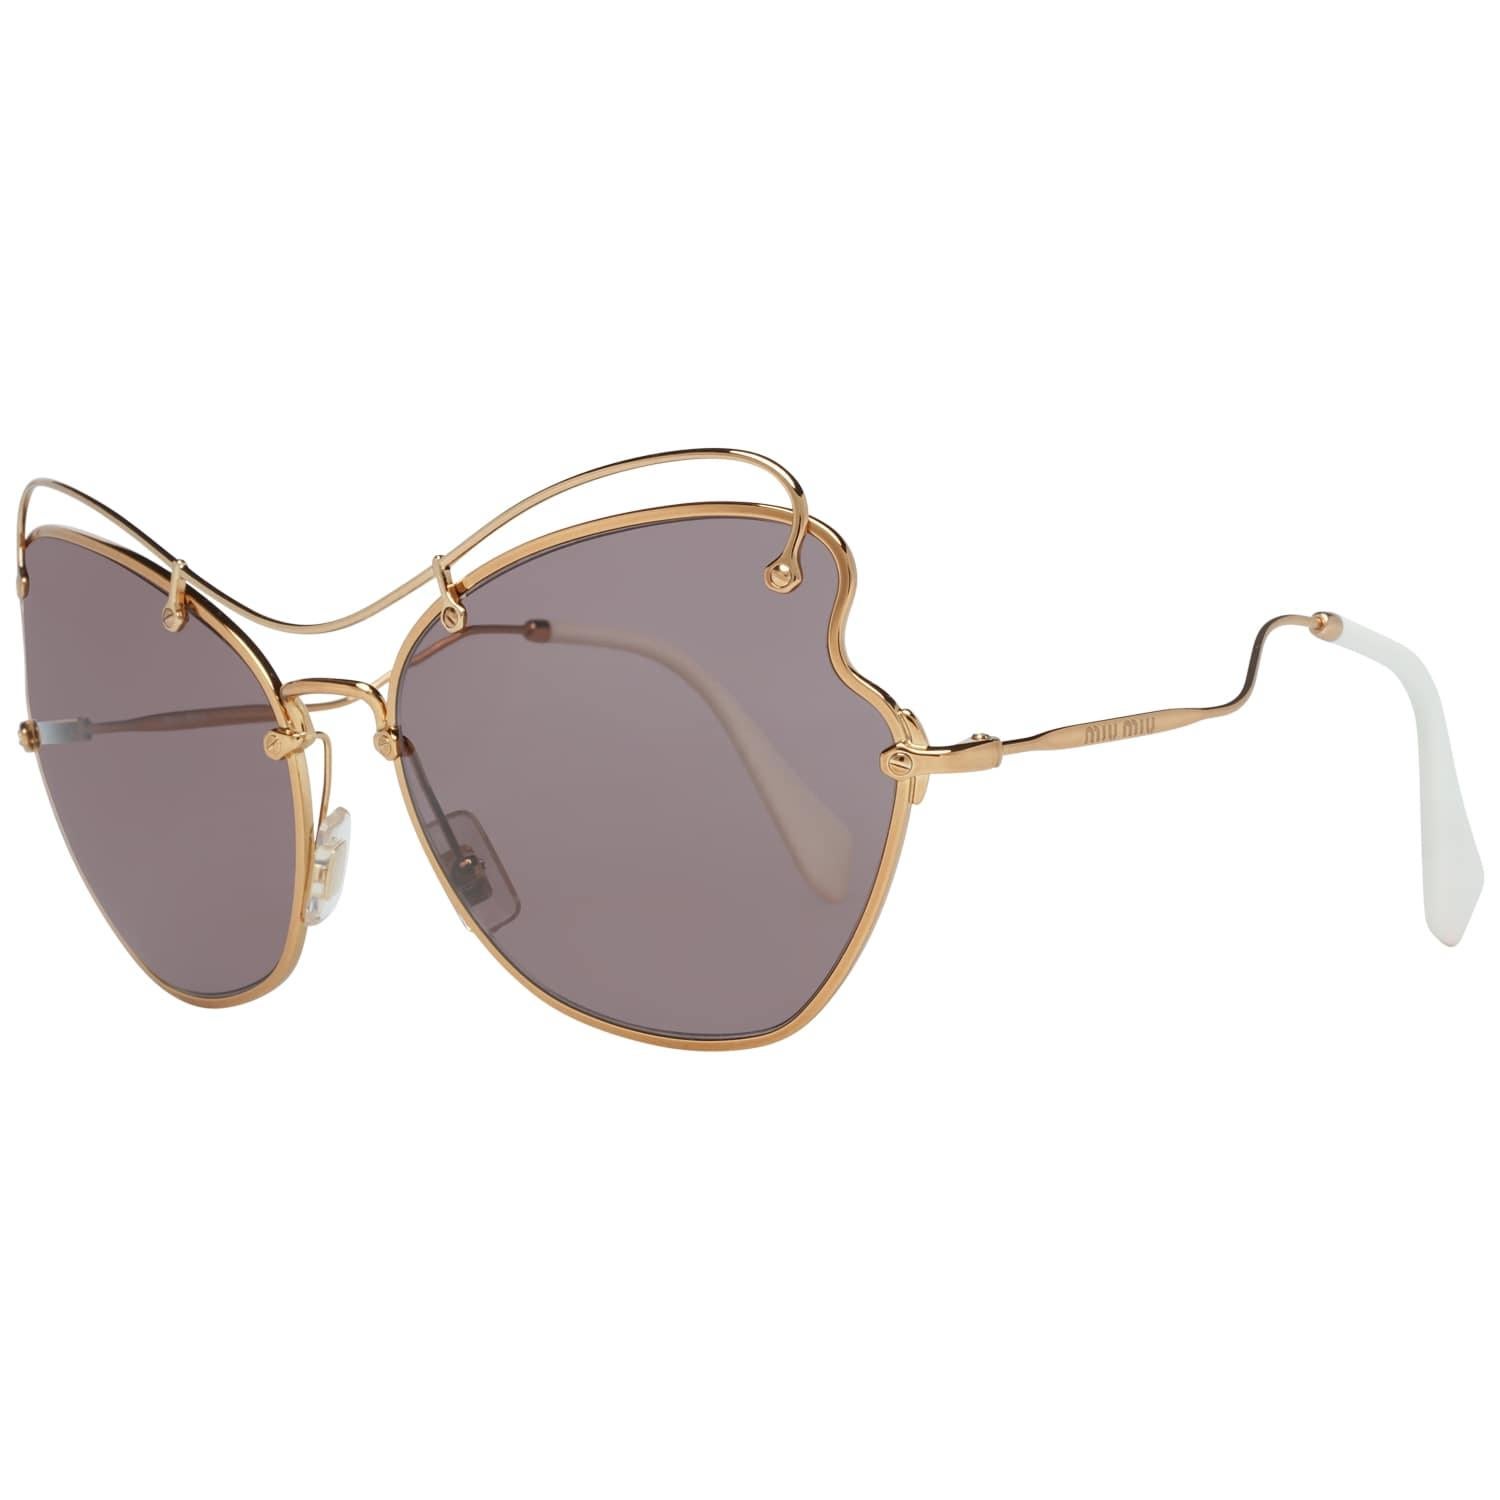 Details

MATERIAL: Metal

COLOR: Gold

MODEL: MU56RS 7OE6X165

GENDER: Women

COUNTRY OF MANUFACTURE: Italy

TYPE: Sunglasses

ORIGINAL CASE?: Yes

STYLE: Butterfly

OCCASION: Casual

FEATURES: Lightweight

LENS COLOR: RosÃ© Gold

LENS TECHNOLOGY: